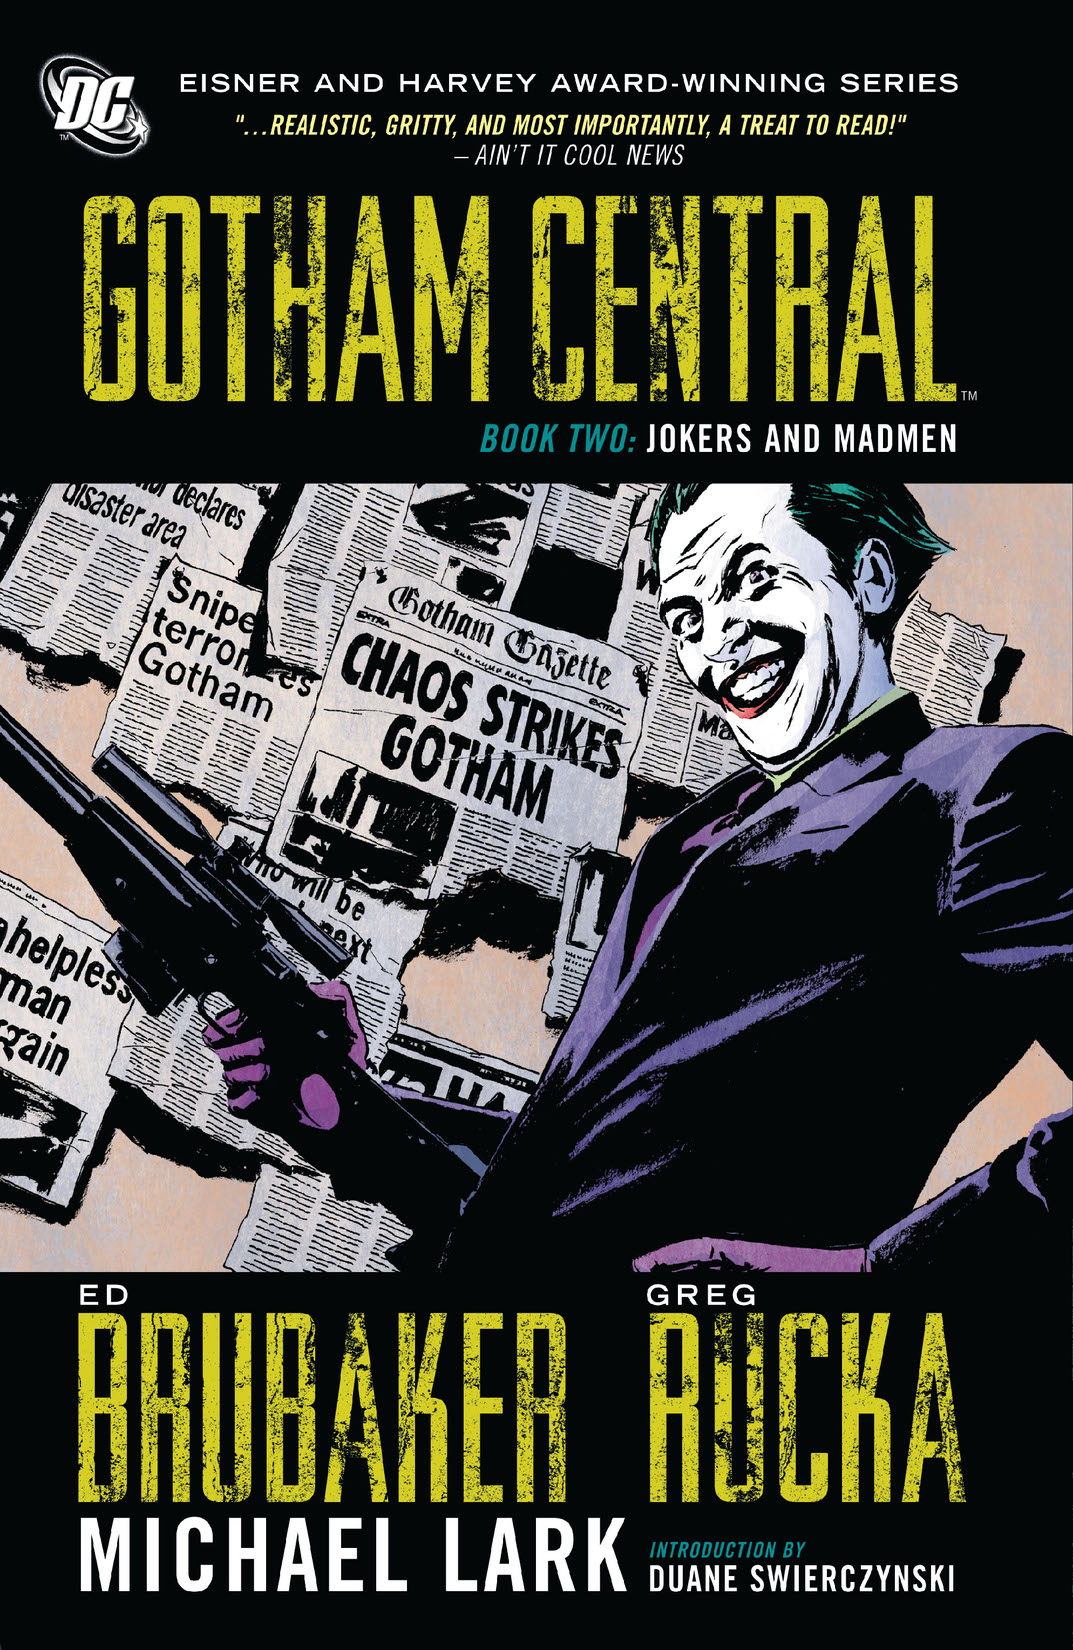 Gotham Central Book 2: Jokers and Madmen preview images